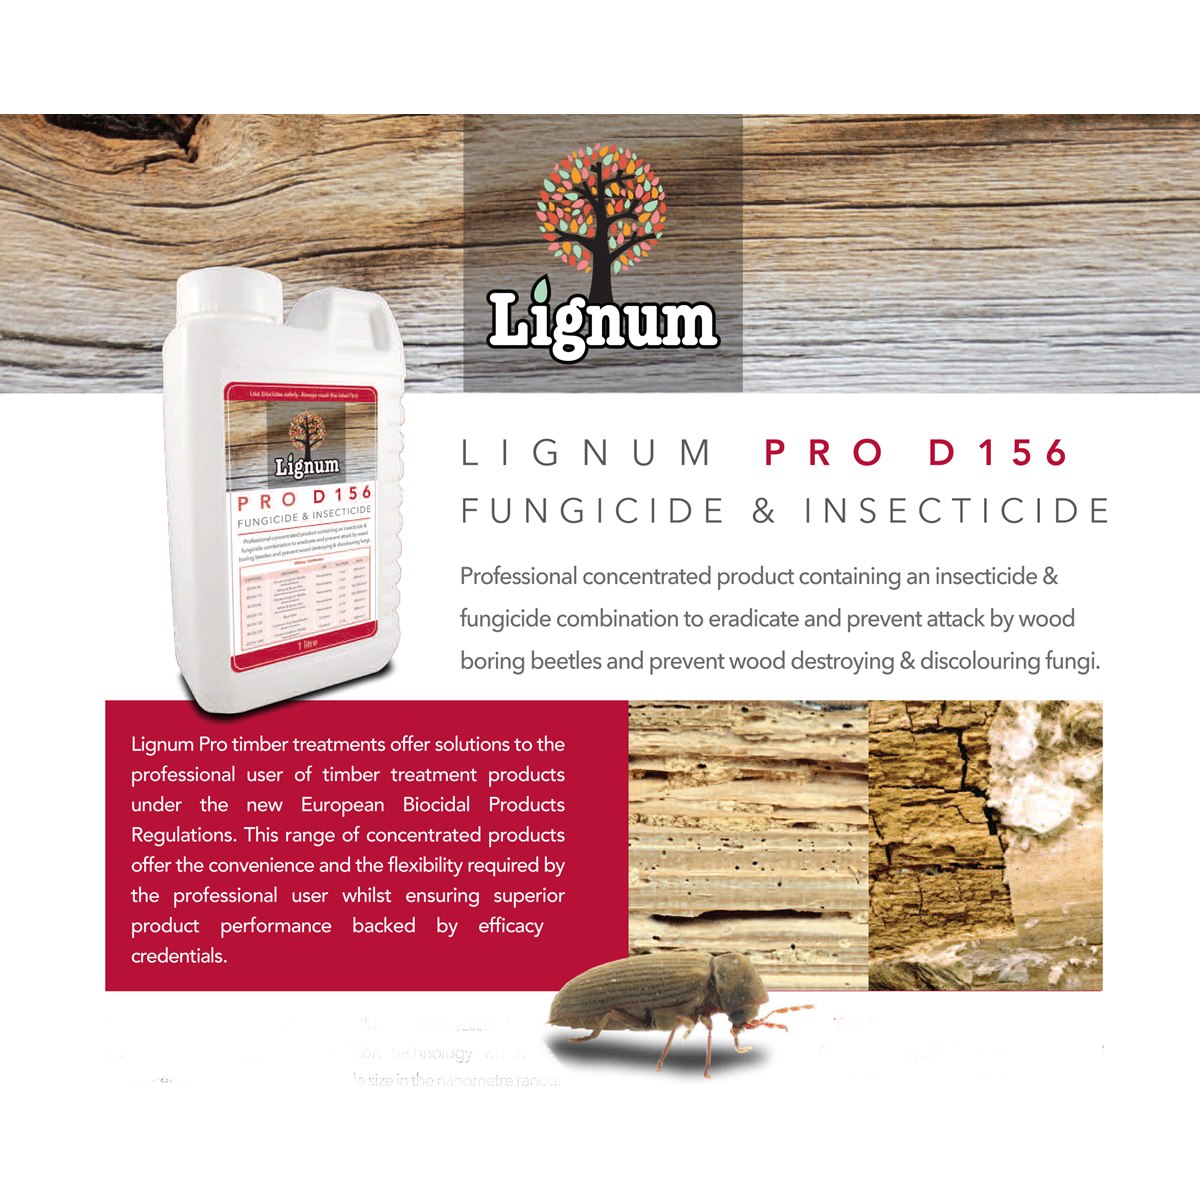 Lignum Pro D156 Professional Concentrated Fungicide 